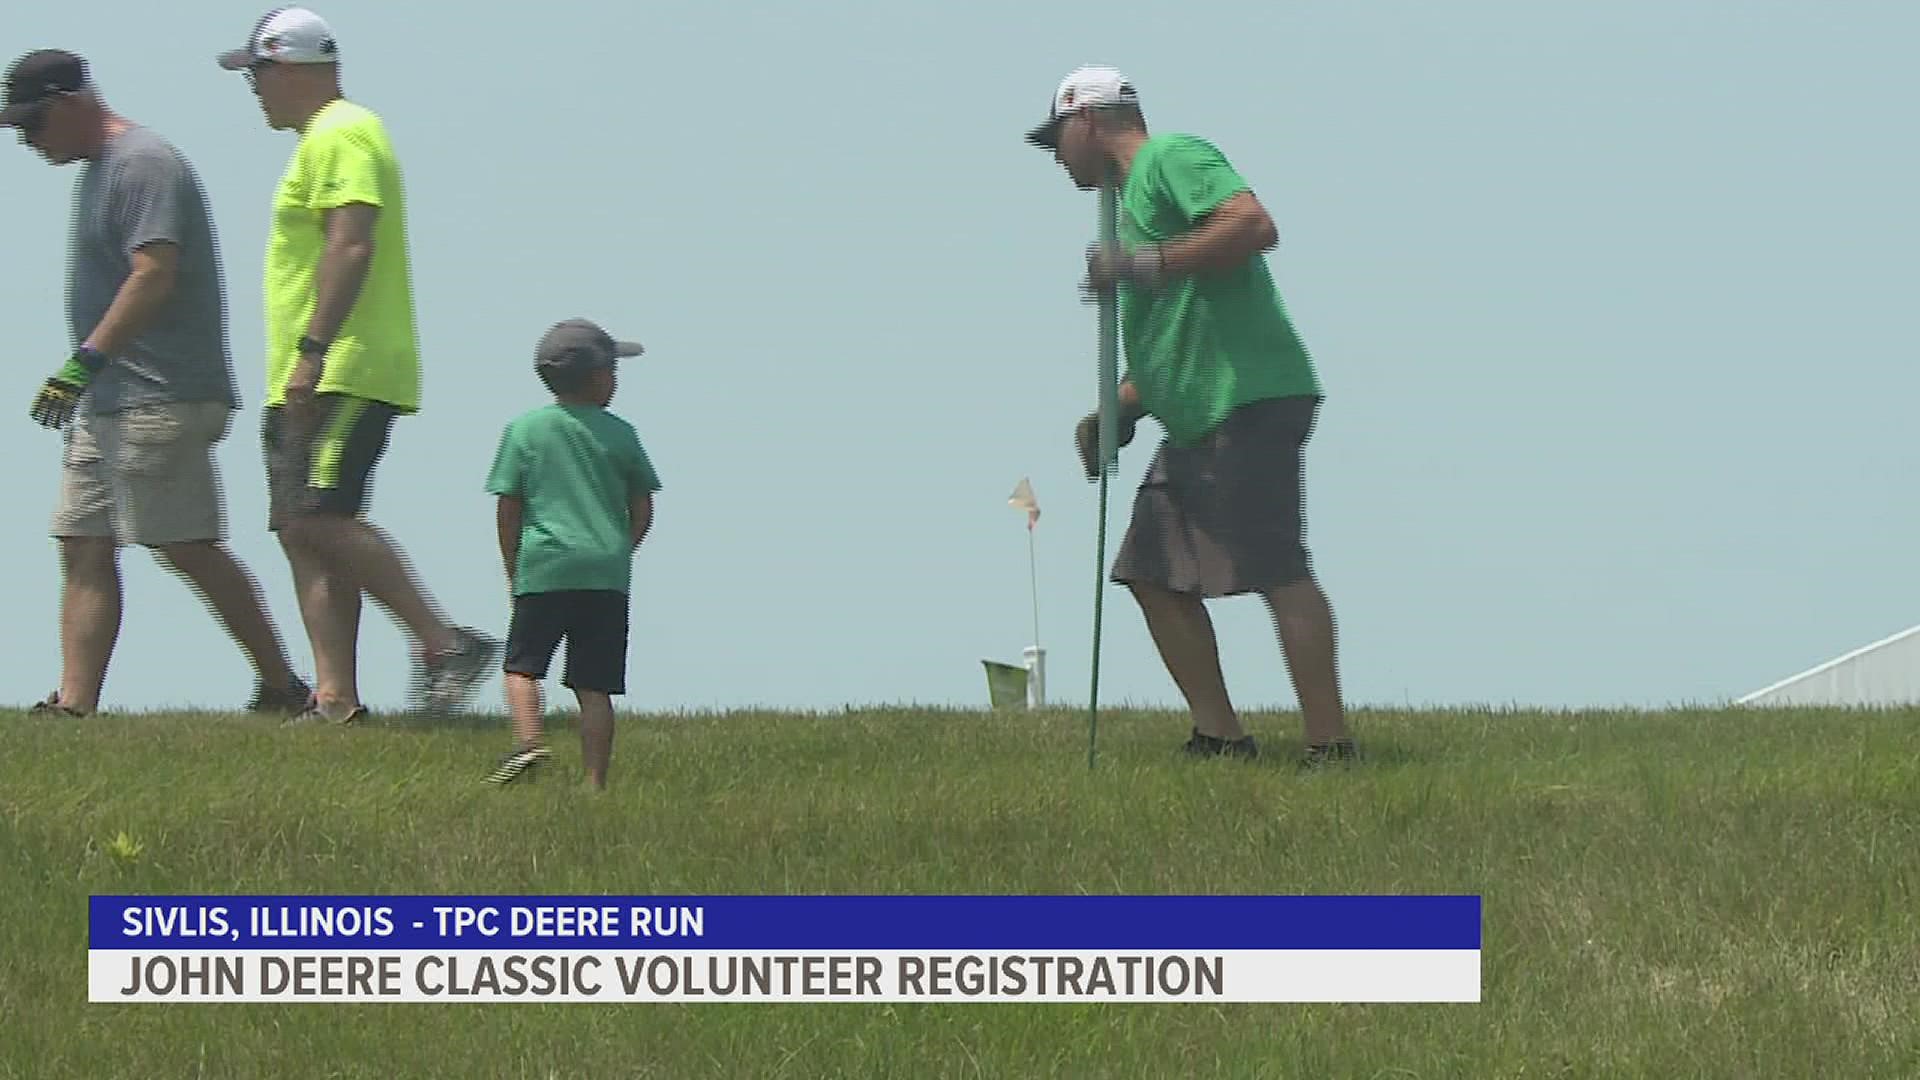 You can visit the JDC's volunteer page to register to help out and enjoy a number of perks at the tournament.